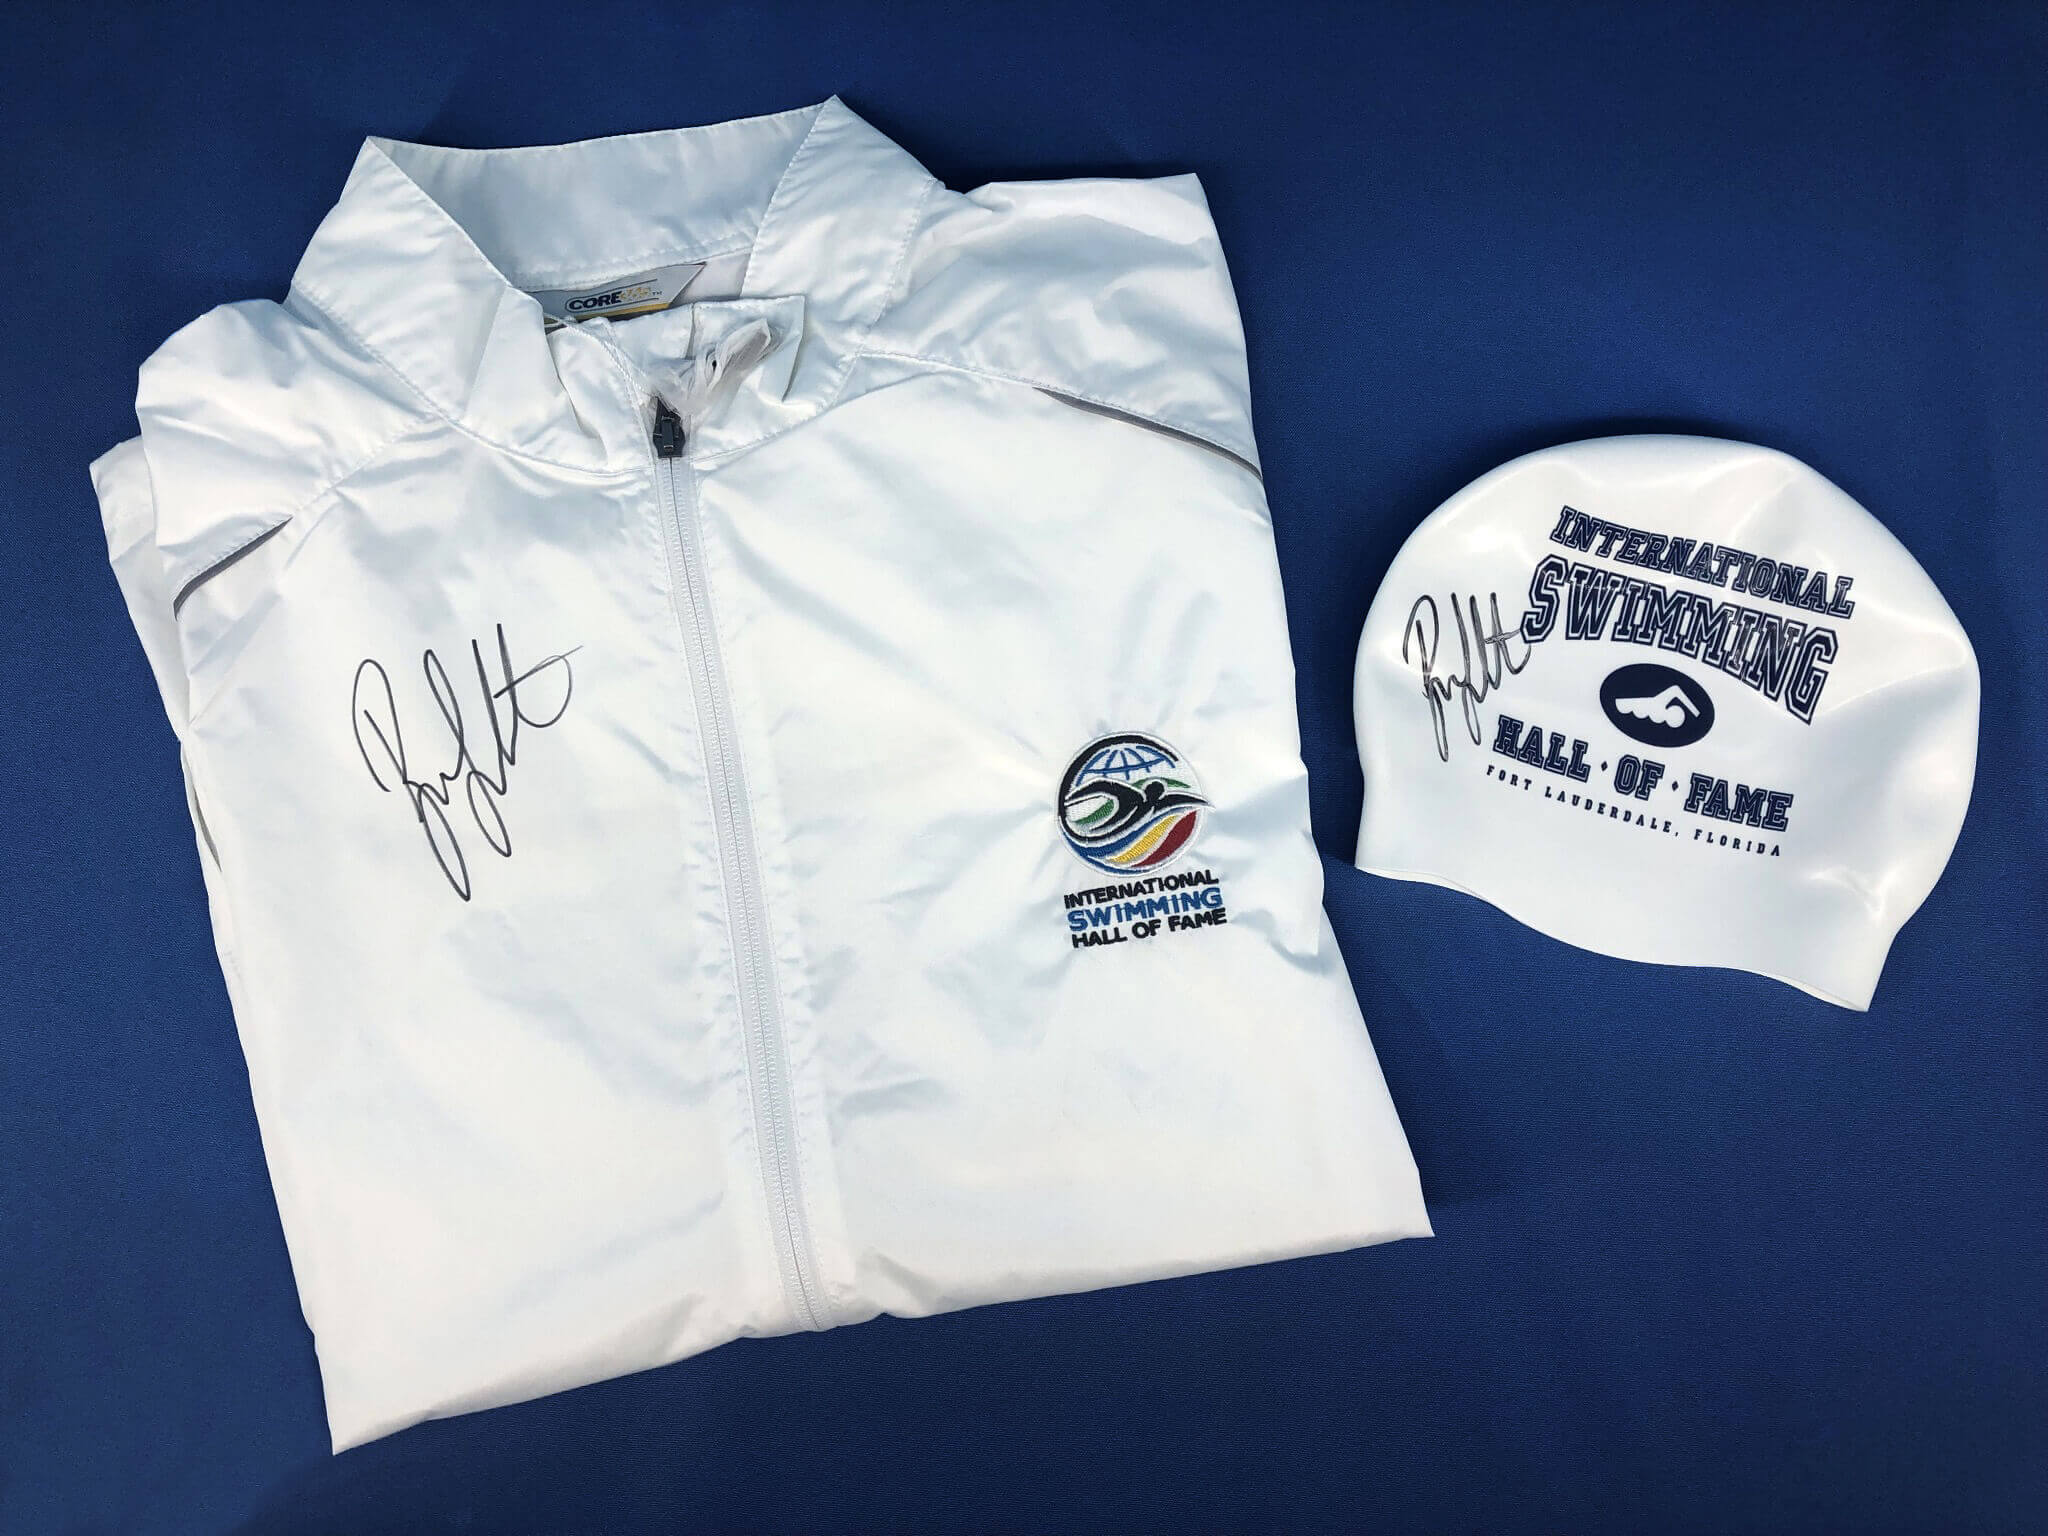 Ryan Lochte Autographed Jacket and Cap for Silent auction 2019